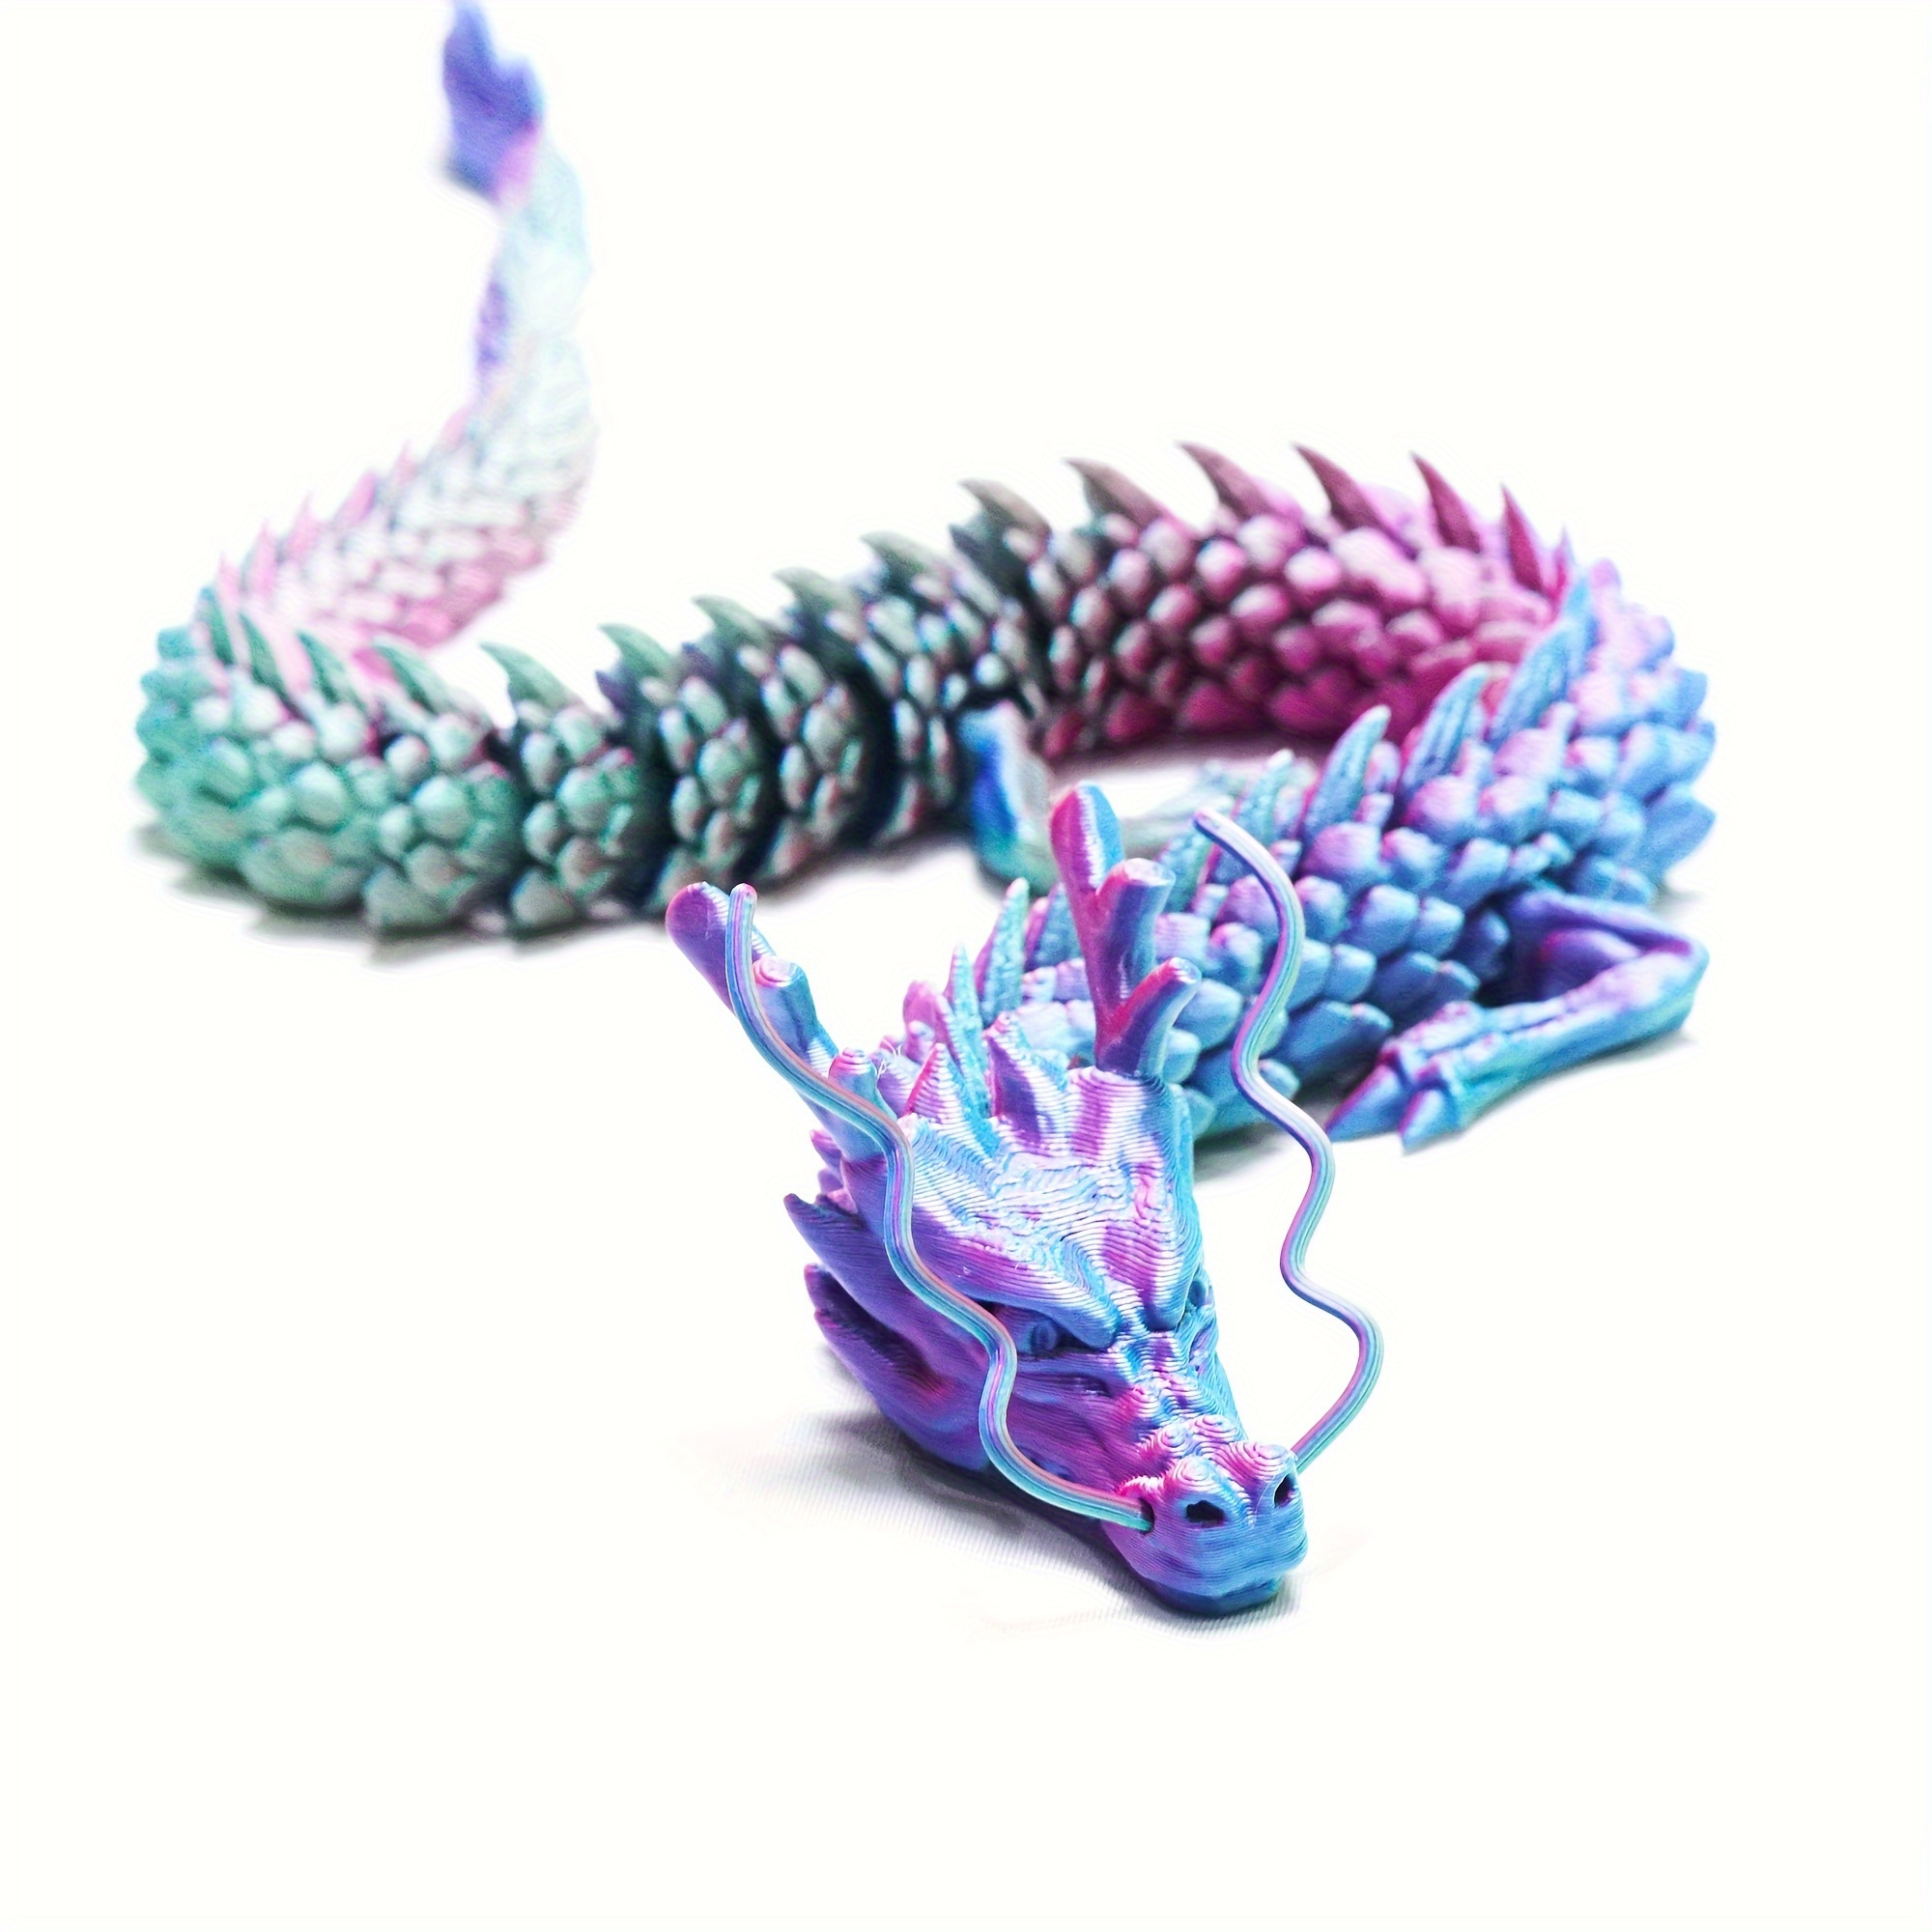 3d Printed Dragon, 3d Printed Articulated Dragon With Movable